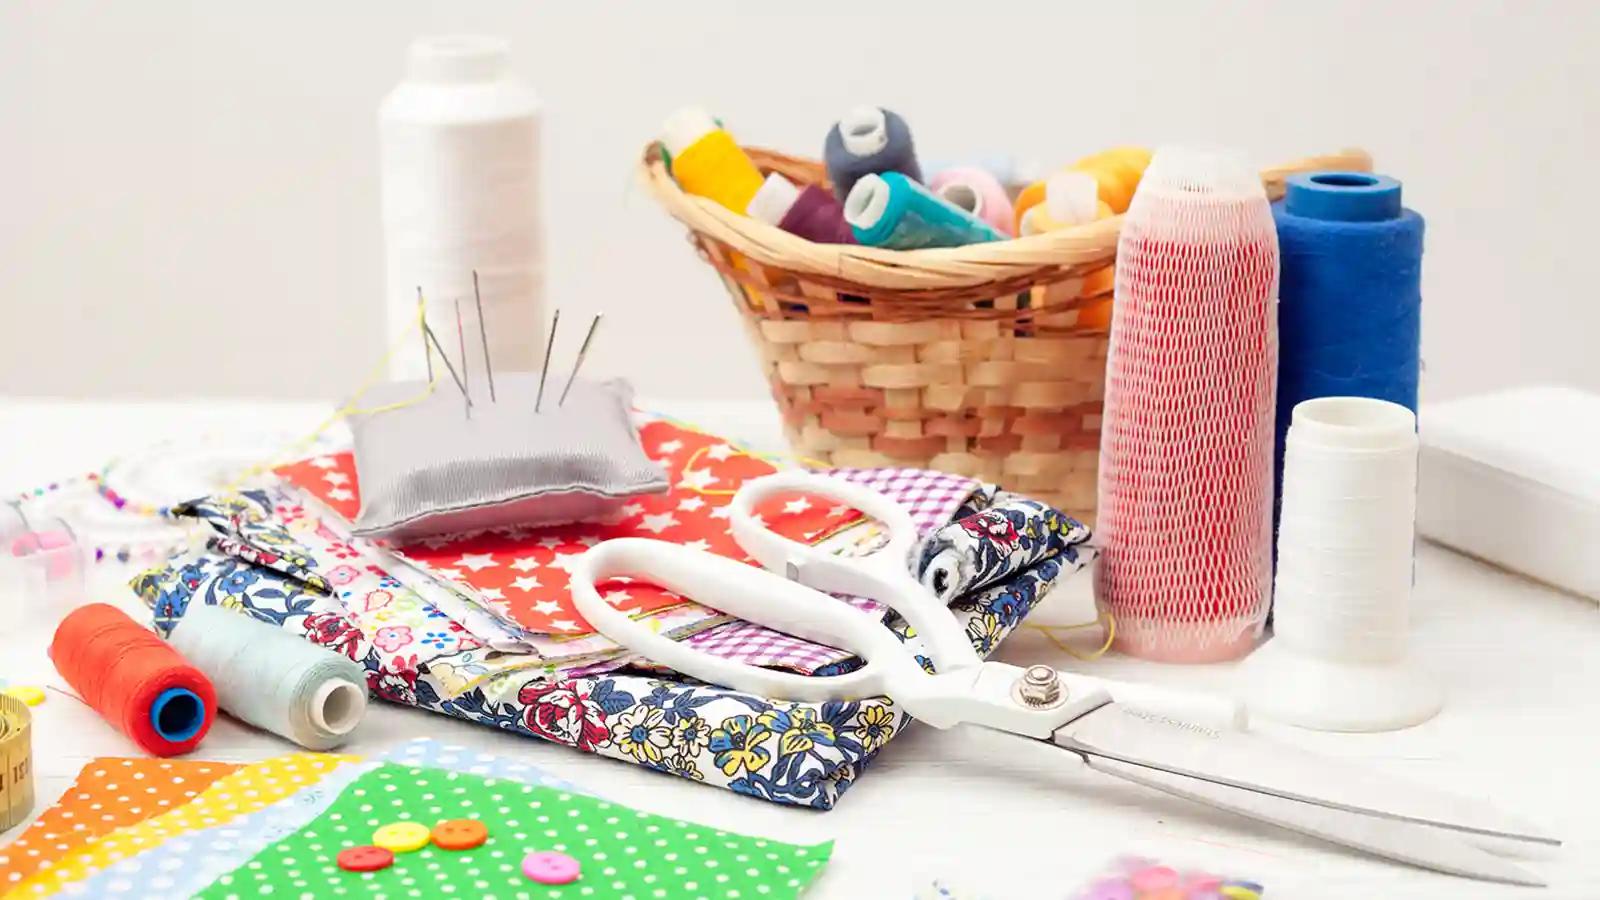 18 Must-Have Sewing Supplies for Beginners: Ultimate List of Best Sewing Tools